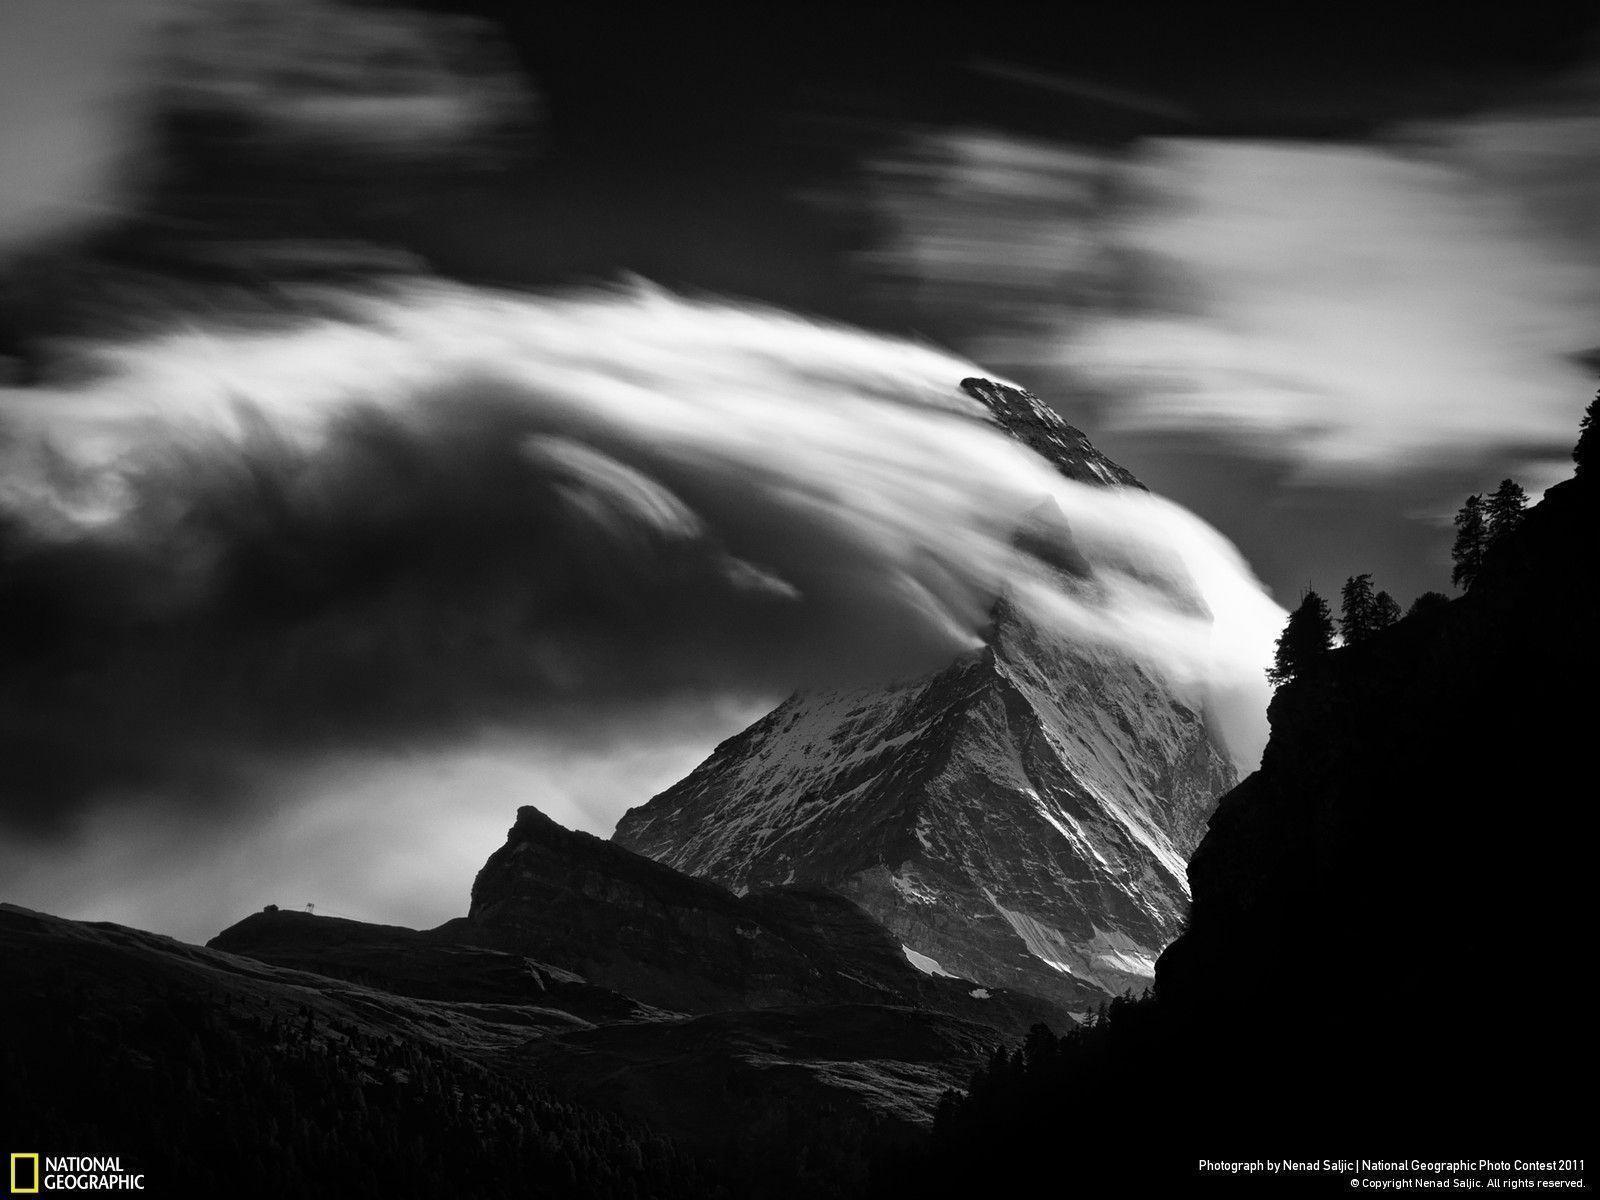 Matterhorn: Afternoon Clouds Geographic Photo Contest